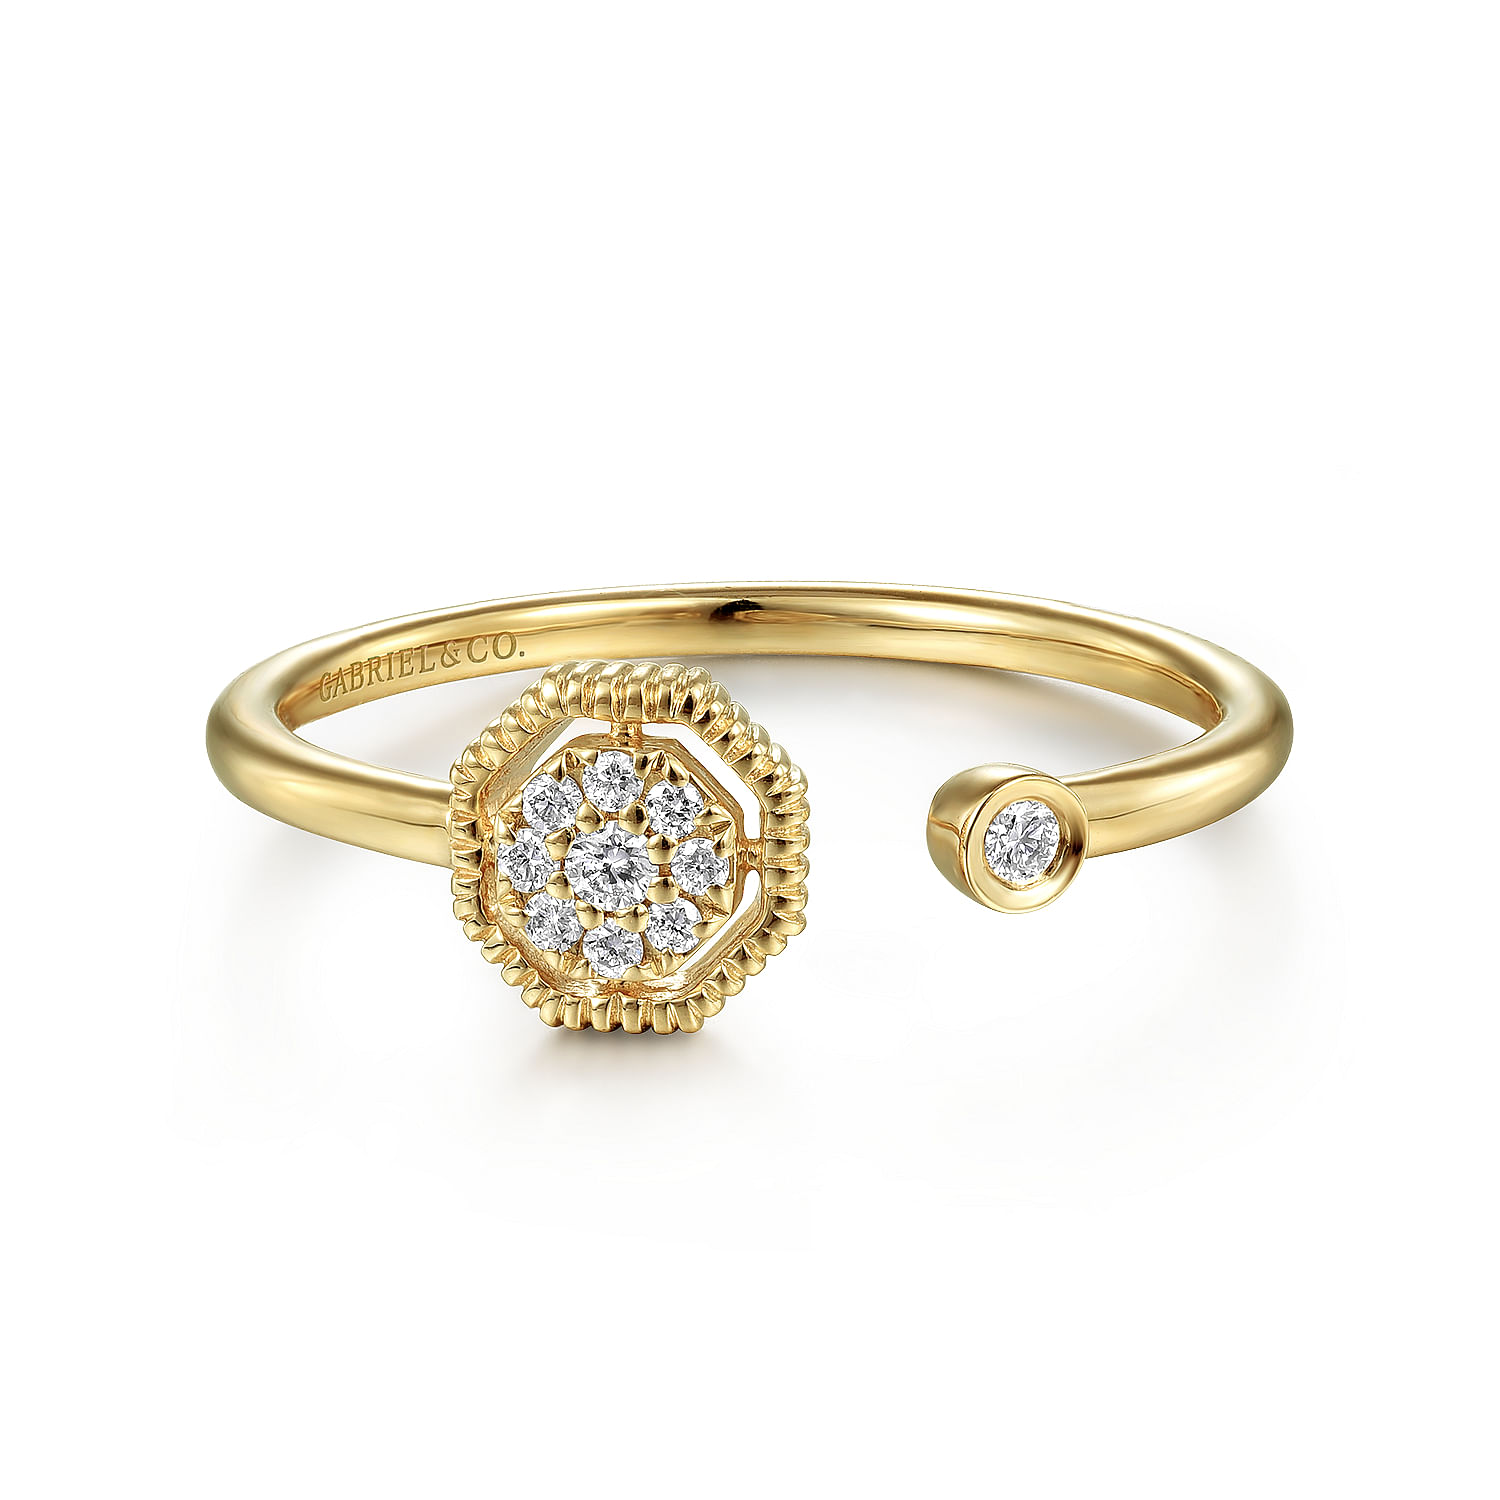 Split 14K Yellow Gold Diamond Ring with Pave Hexagon and Bezel Stone